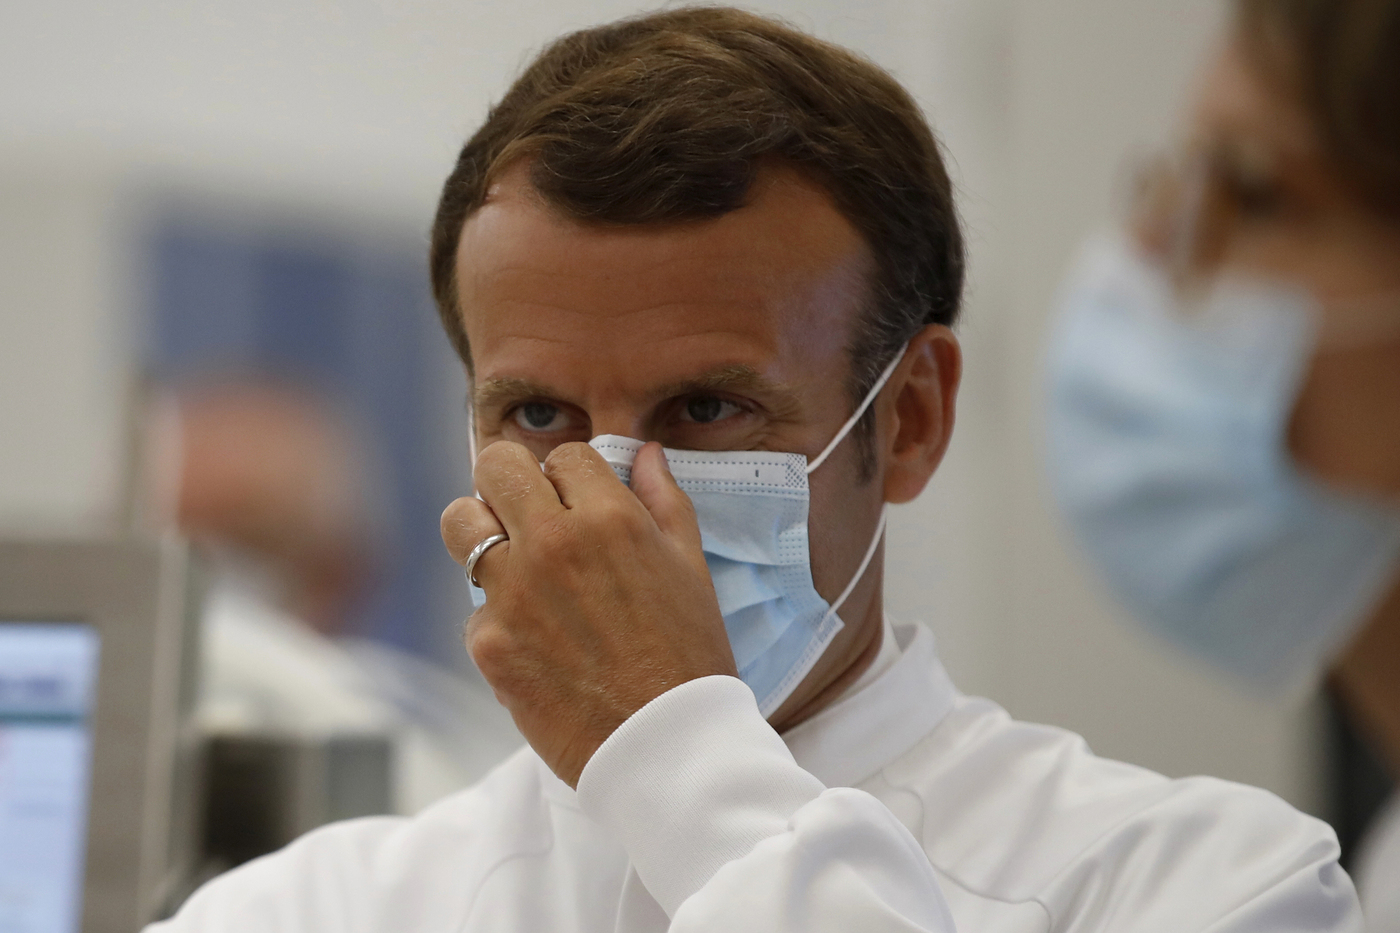 French President Emmanuel Macron adjusts his protective mask as he visits an industrial development laboratory at the French drugmaker's vaccine unit Sanofi Pasteur plant in Marcy-l'Etoile, near Lyon, central France, Tuesday, June 16, 2020. The visit comes after rival pharmaceutical company AstraZeneca this weekend announced a deal to supply 400 million vaccine doses to EU countries, including France. (Gonzalo Fuentes/Pool via AP)